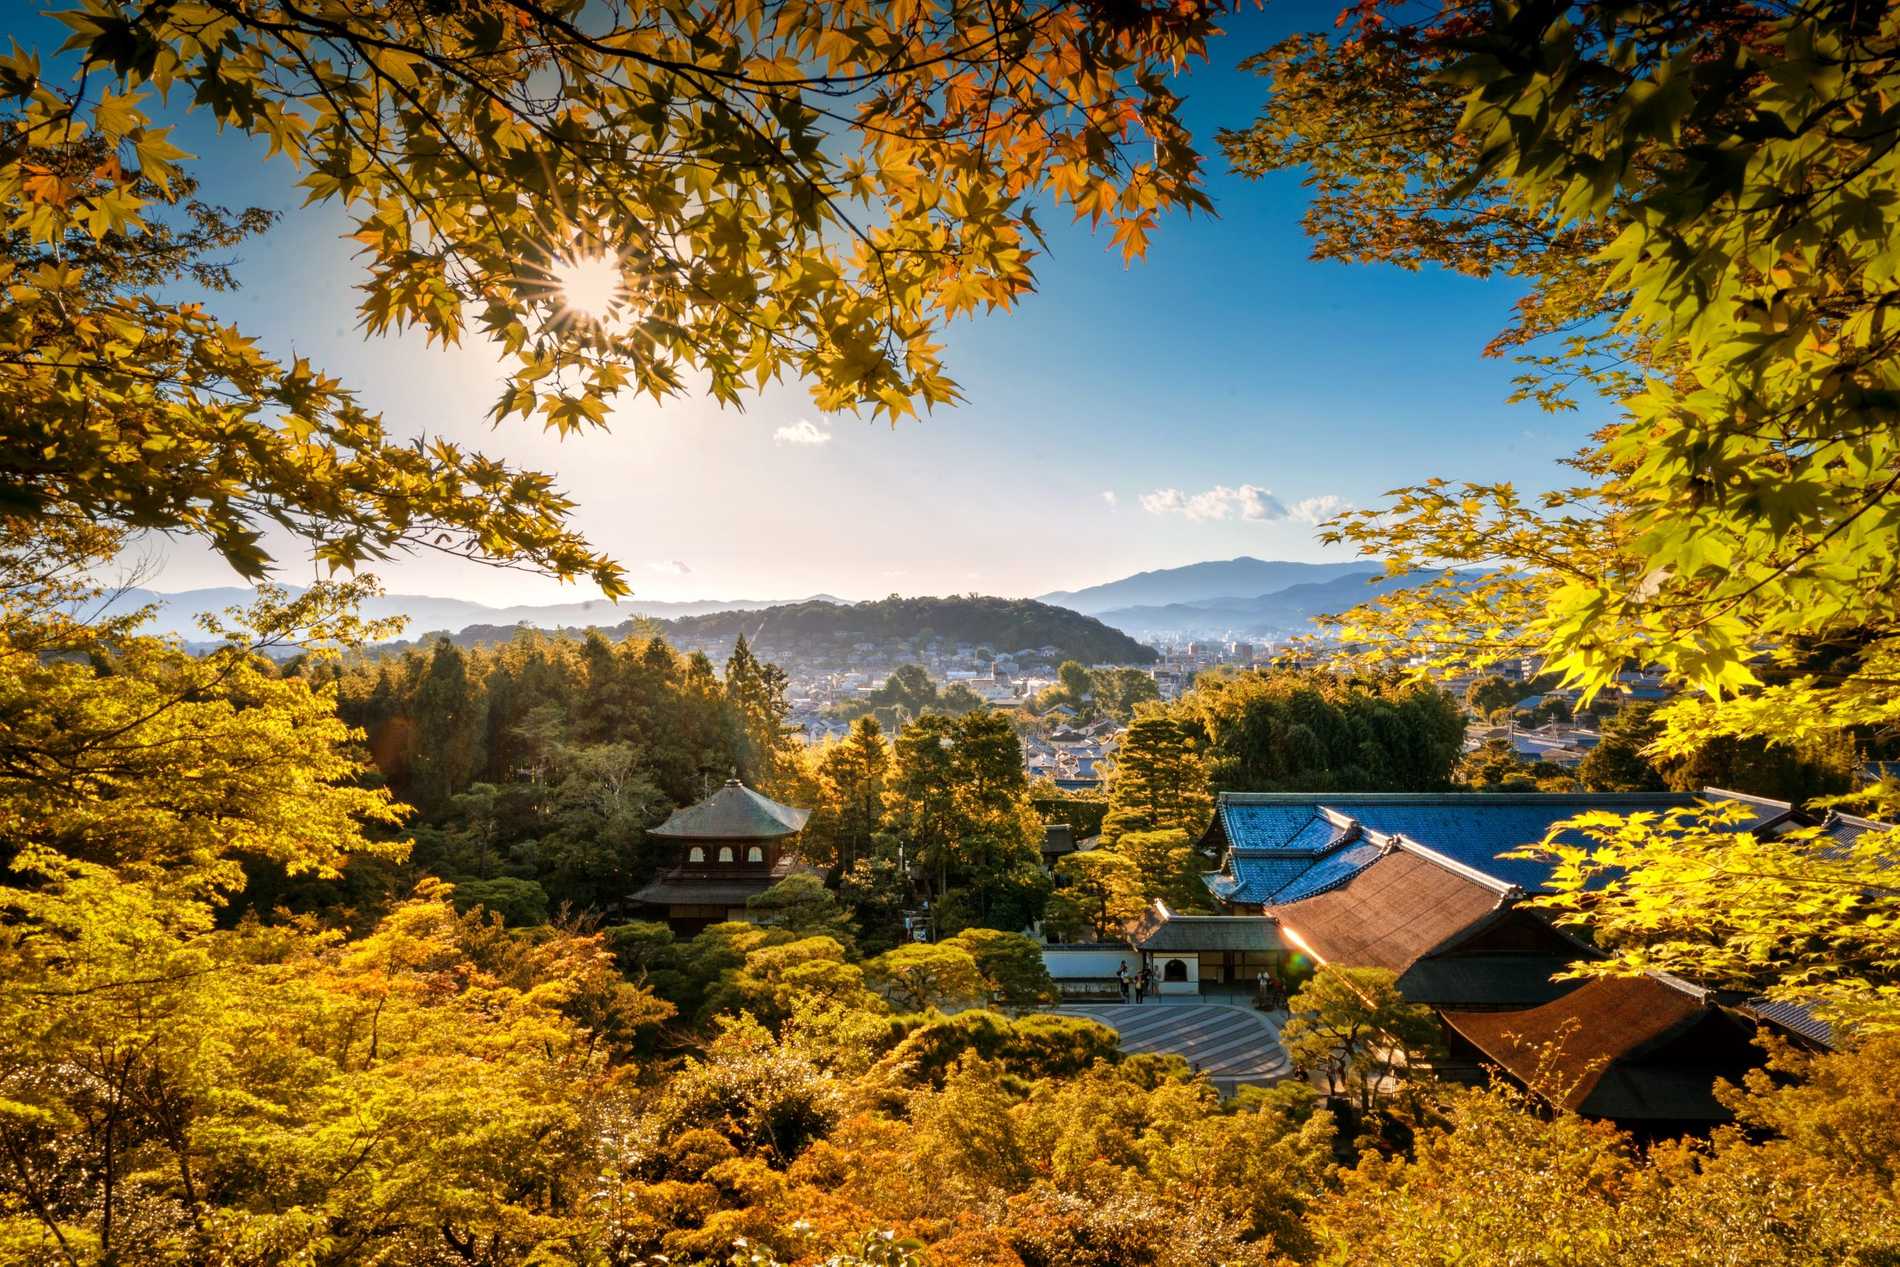 Looking through a frame of golden autumnal trees through to the temple rooftops of Kyoto below and rolling hills and bright blue sky in the distance.